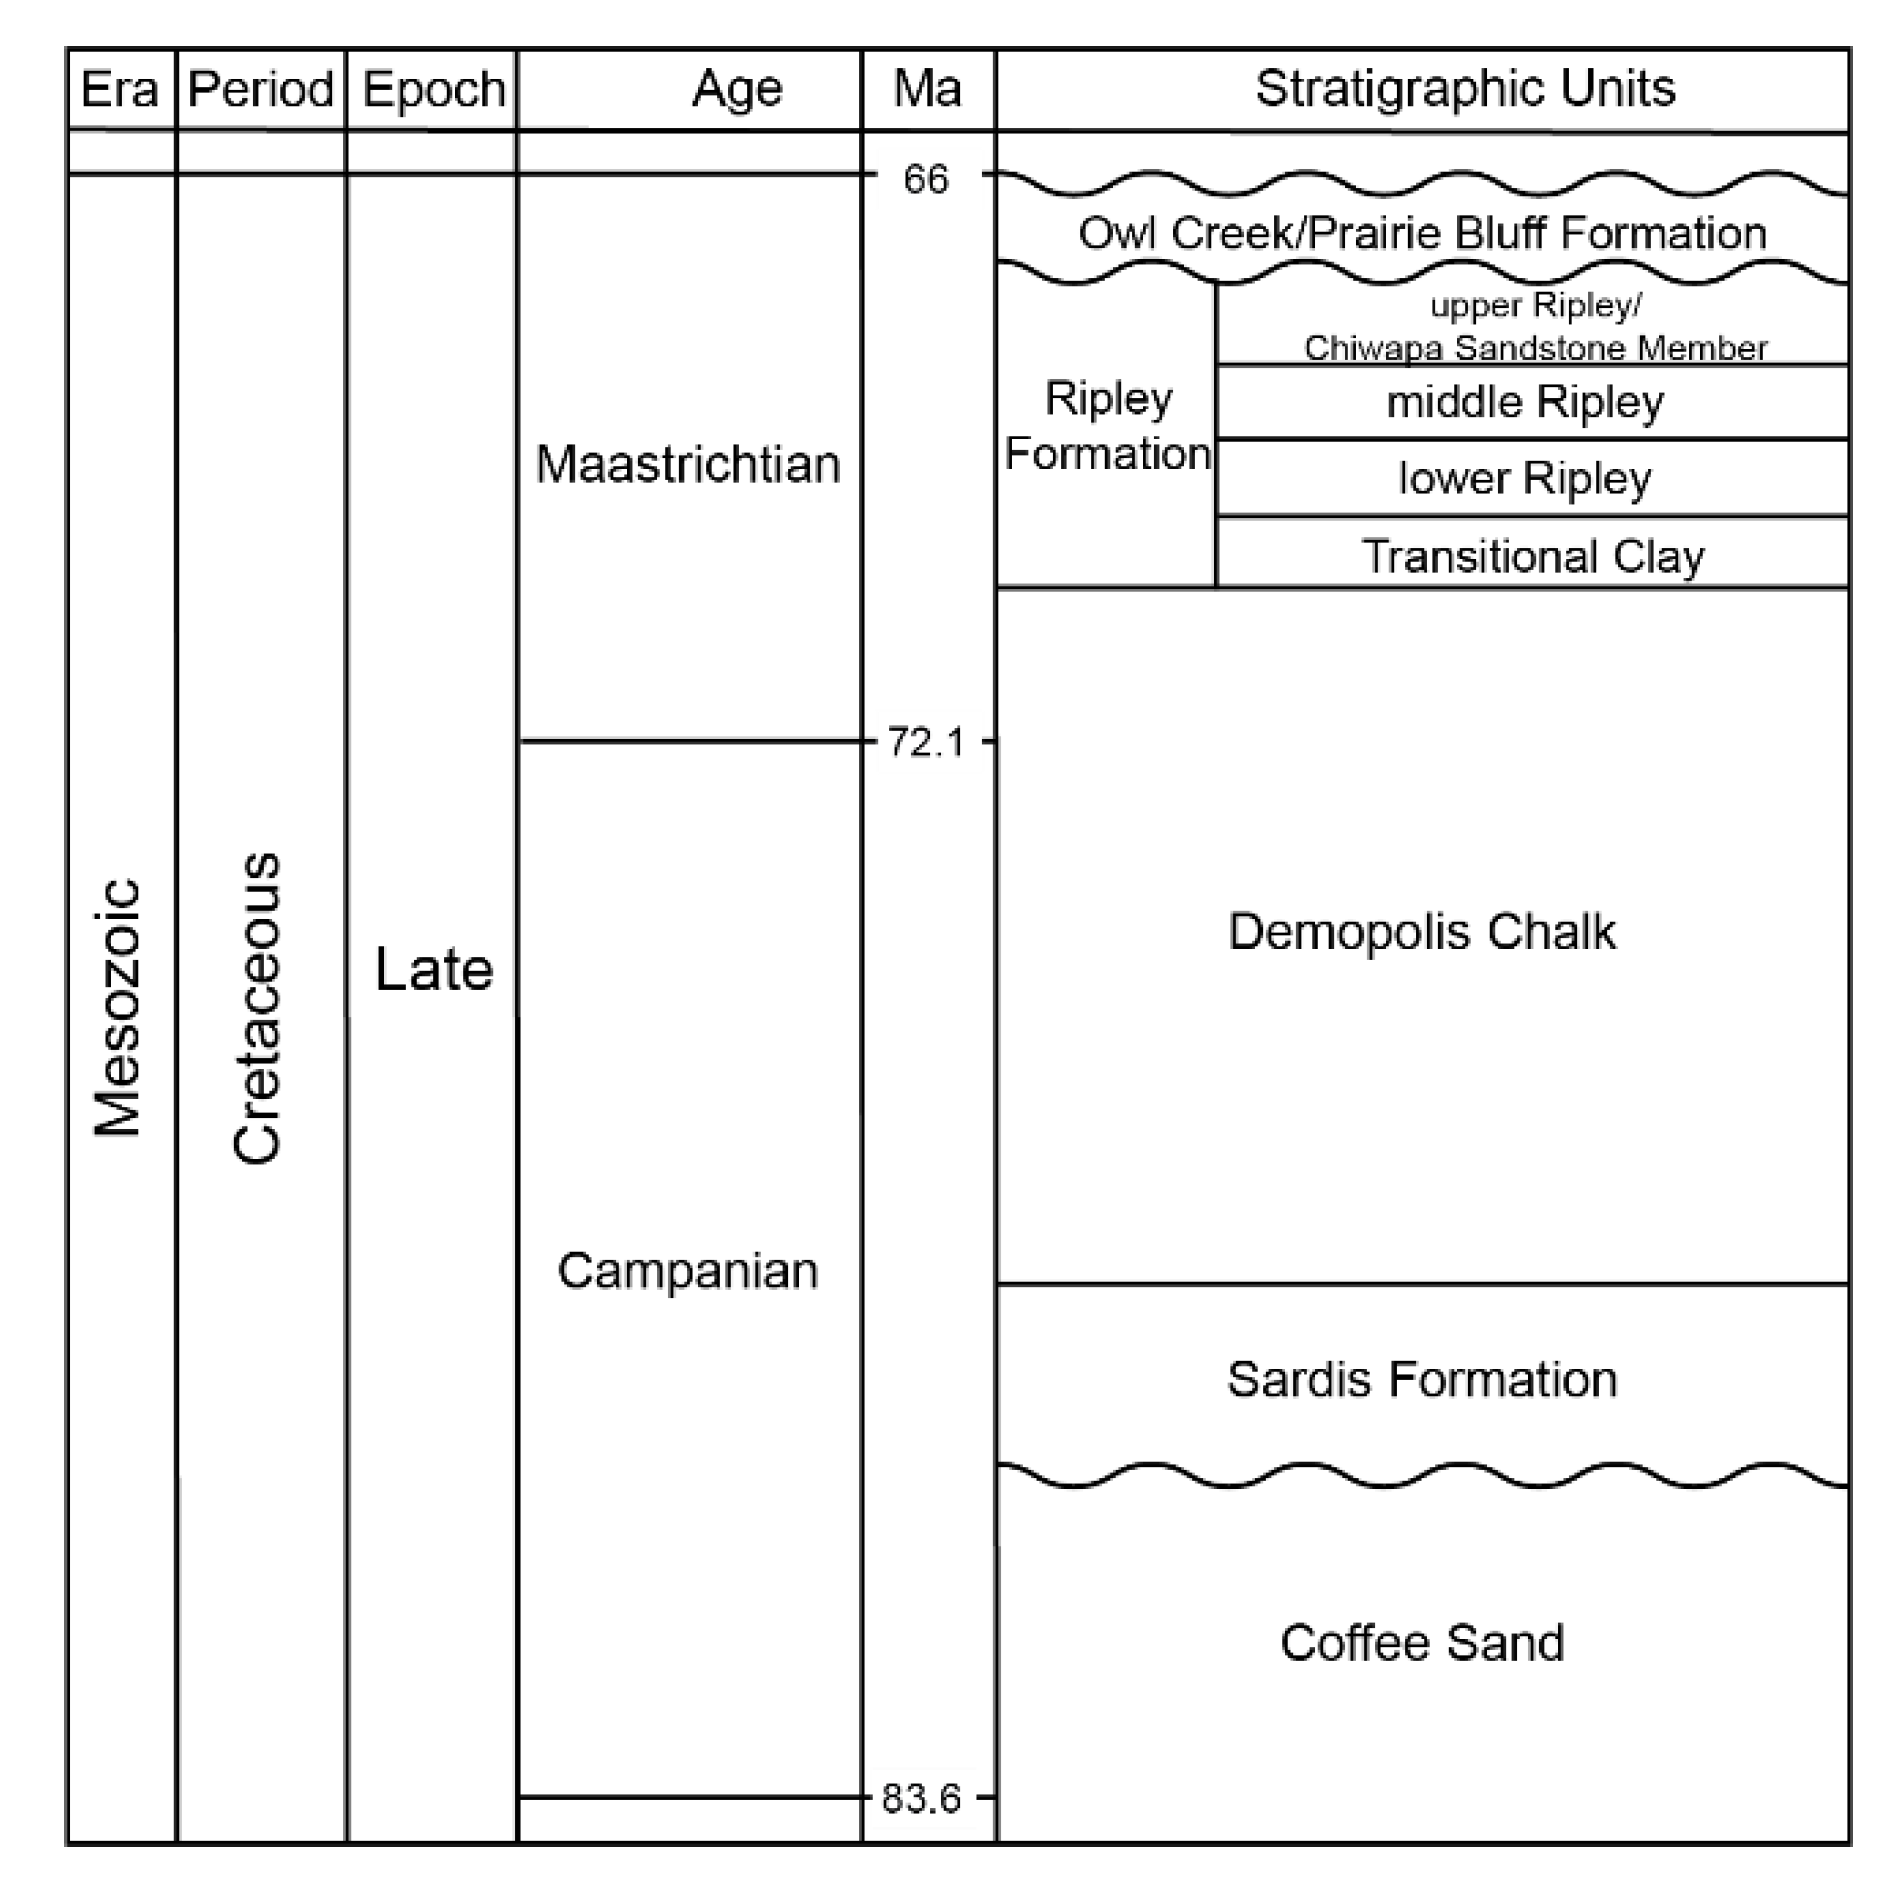 Geosciences | Free Full-Text | Detrital Zircon Provenance and Lithofacies  Associations of Montmorillonitic Sands in the Maastrichtian Ripley  Formation: Implications for Mississippi Embayment Paleodrainage Patterns  and Paleogeography | HTML